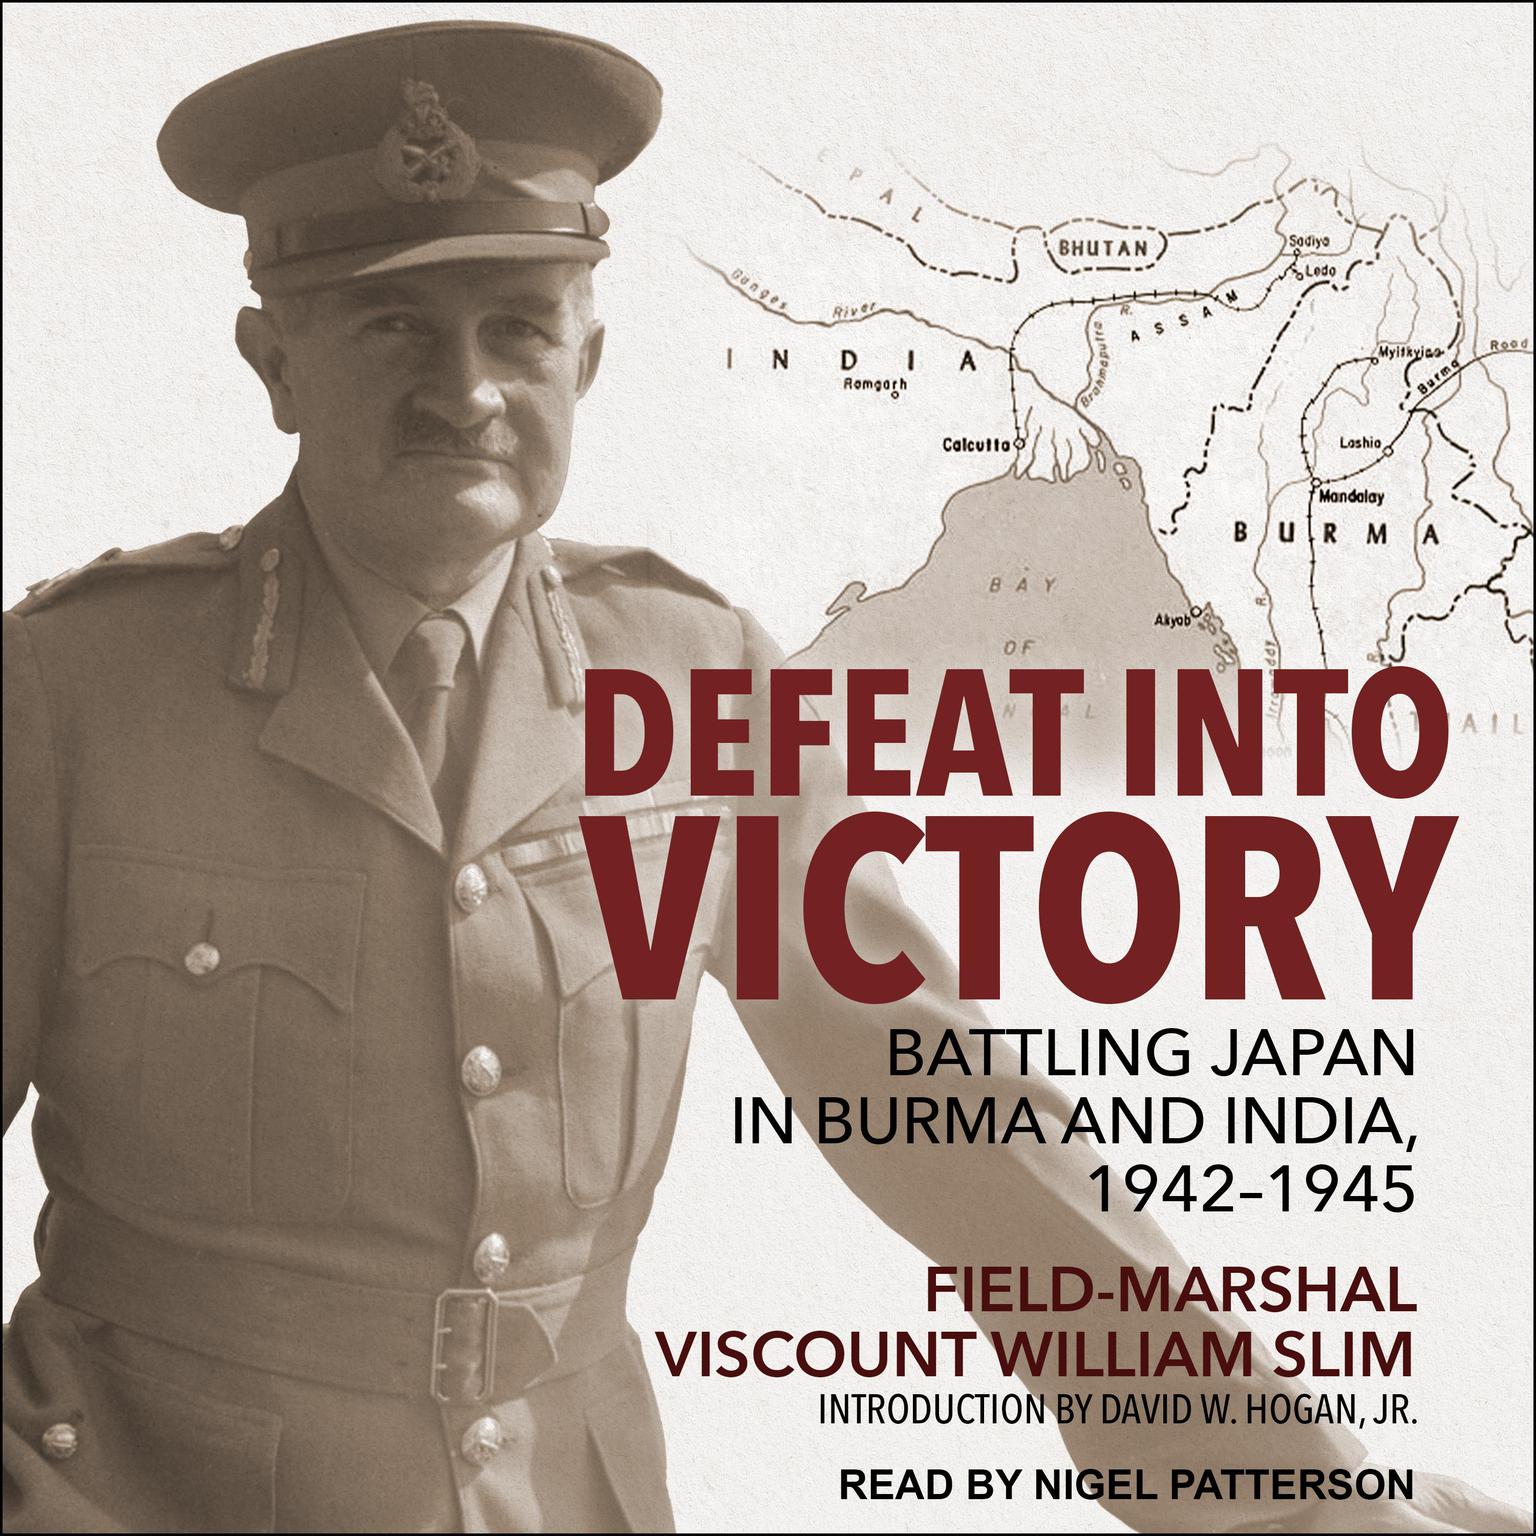 Defeat Into Victory: Battling Japan in Burma and India, 1942-1945 Audiobook, by Field-Marshal Viscount William Slim